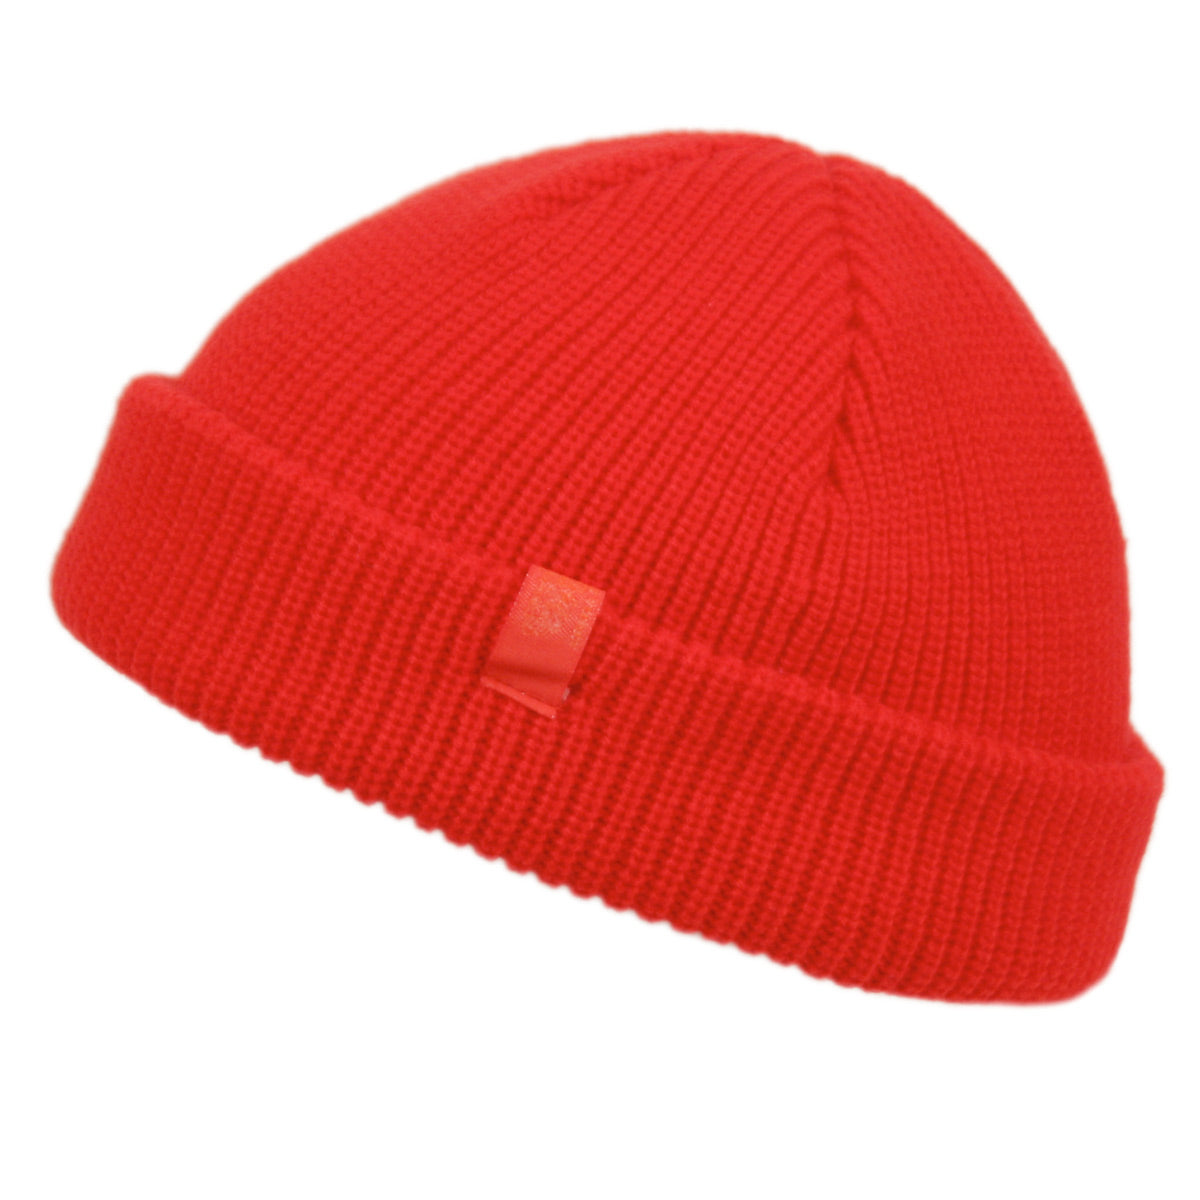 The Knit Dockman Cuff Beanie - Mike The Hatter